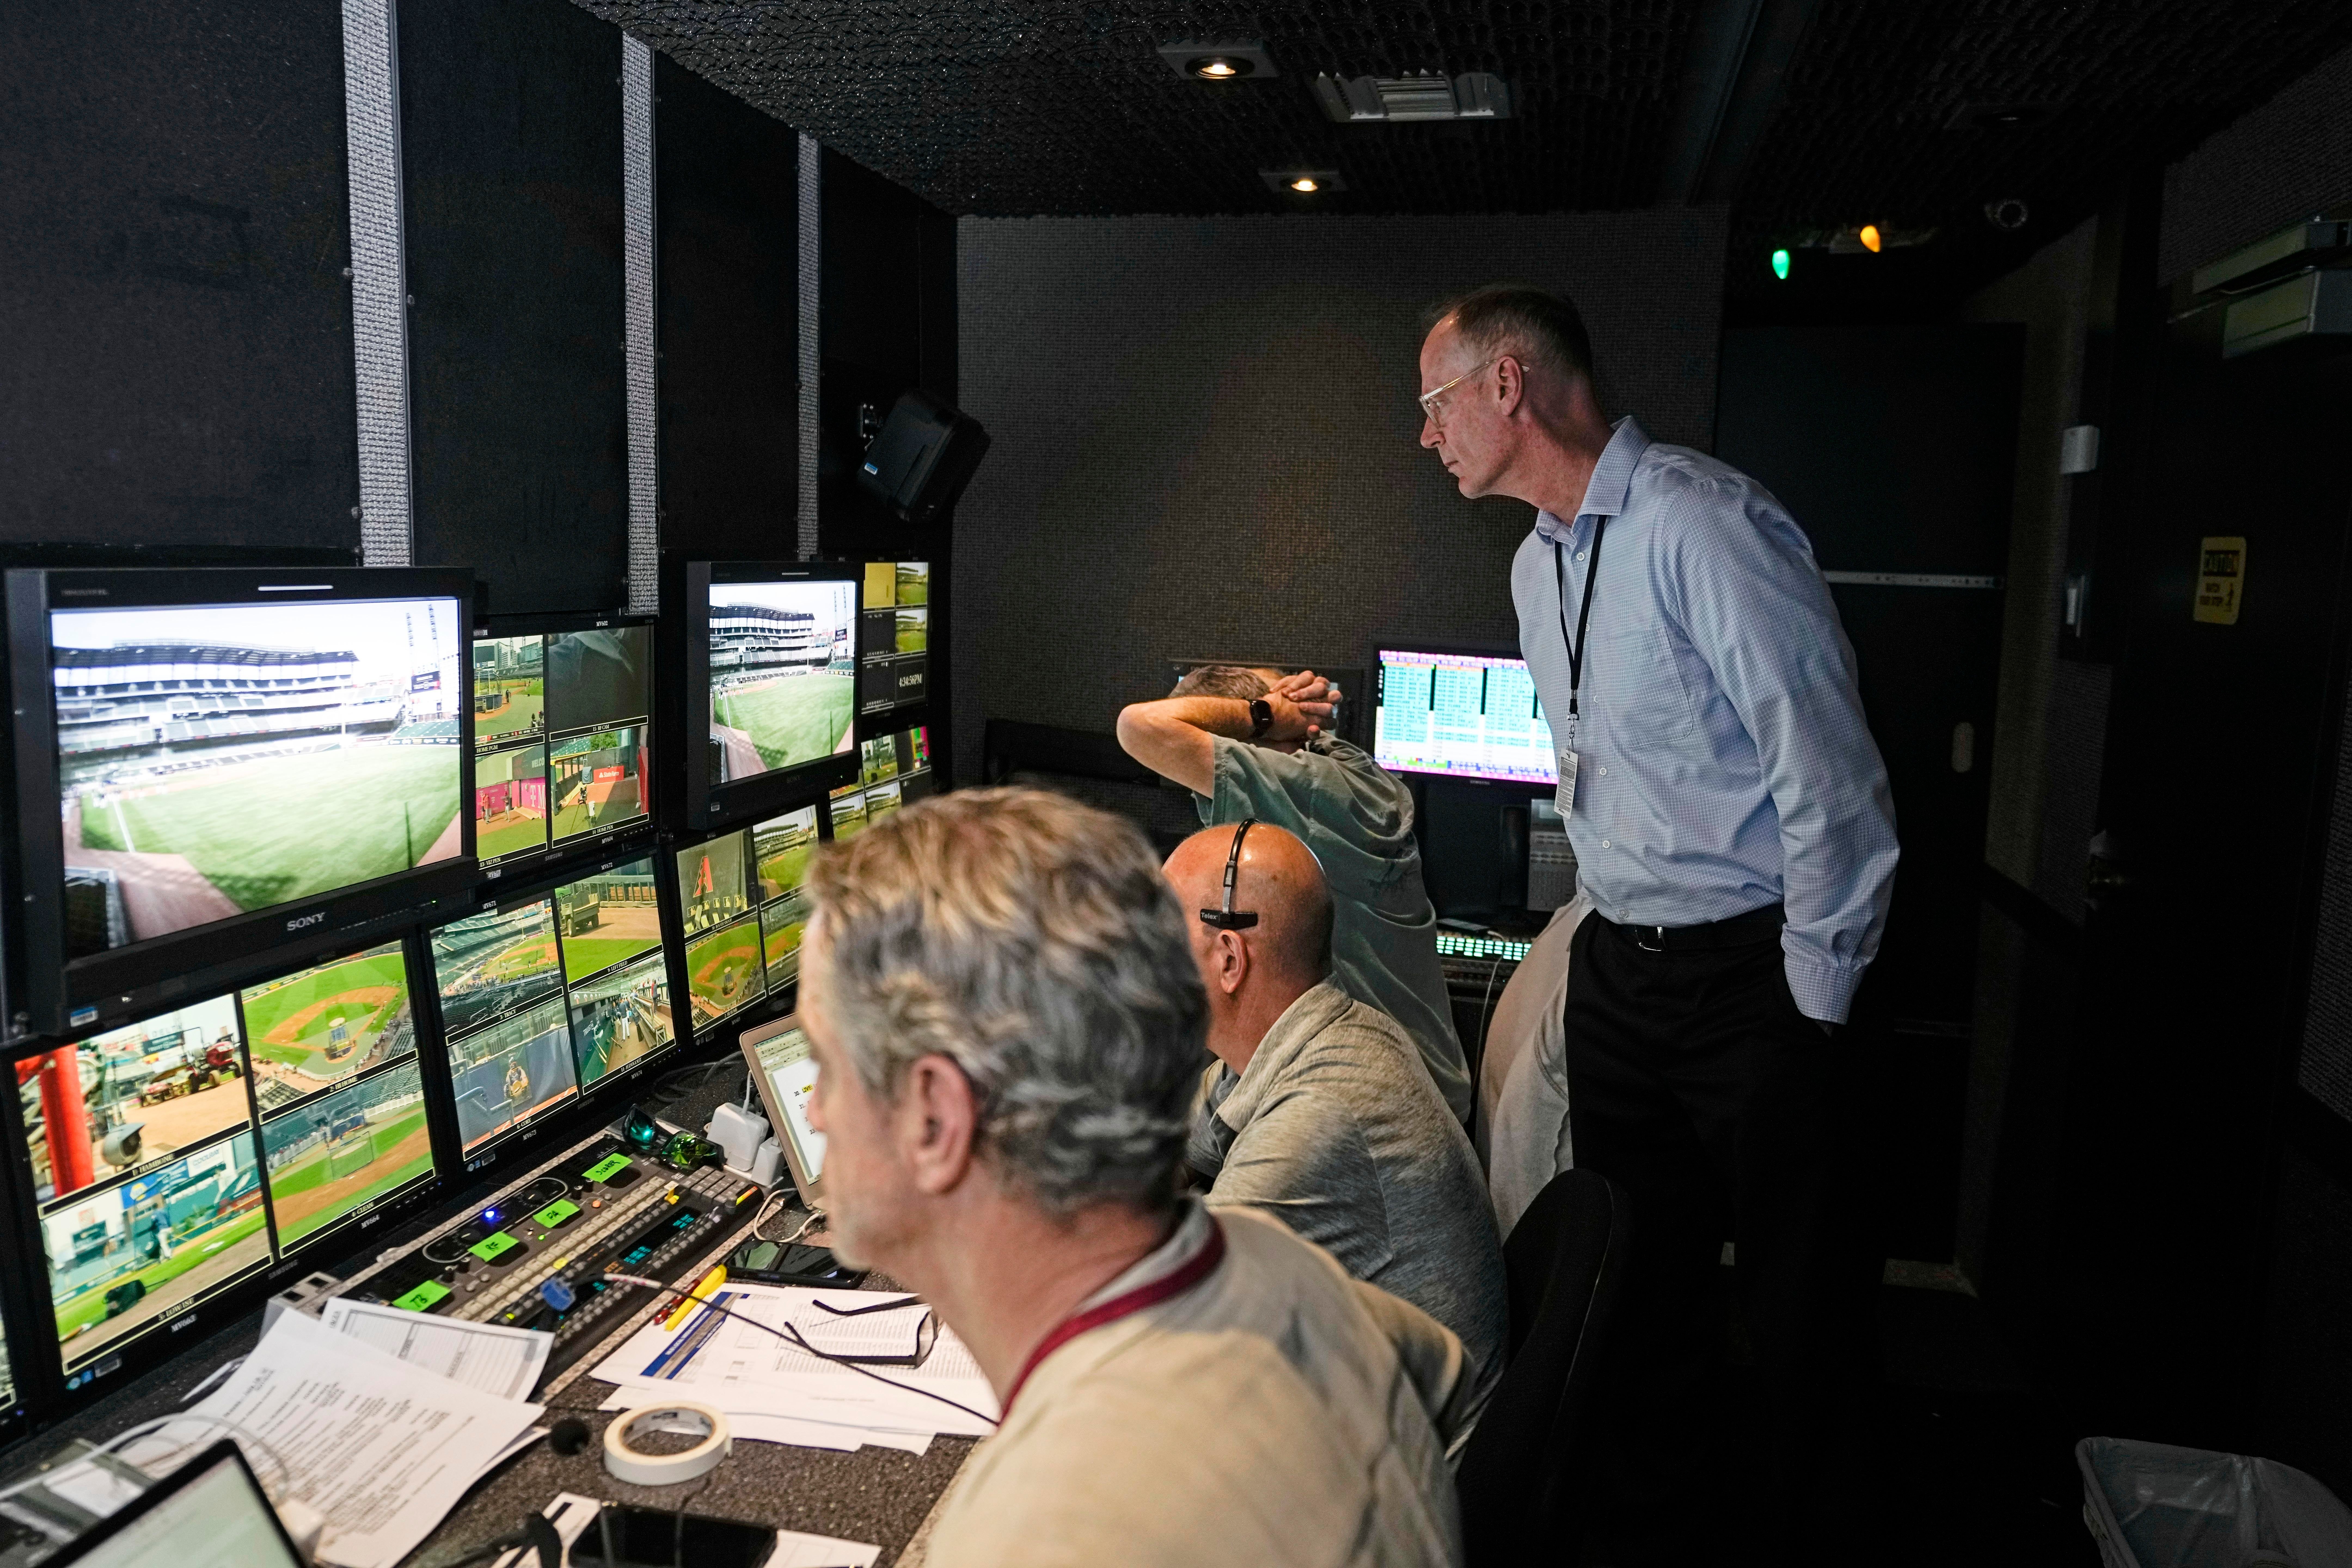 III. Benefits of Technological Advancements in MLB Broadcasting